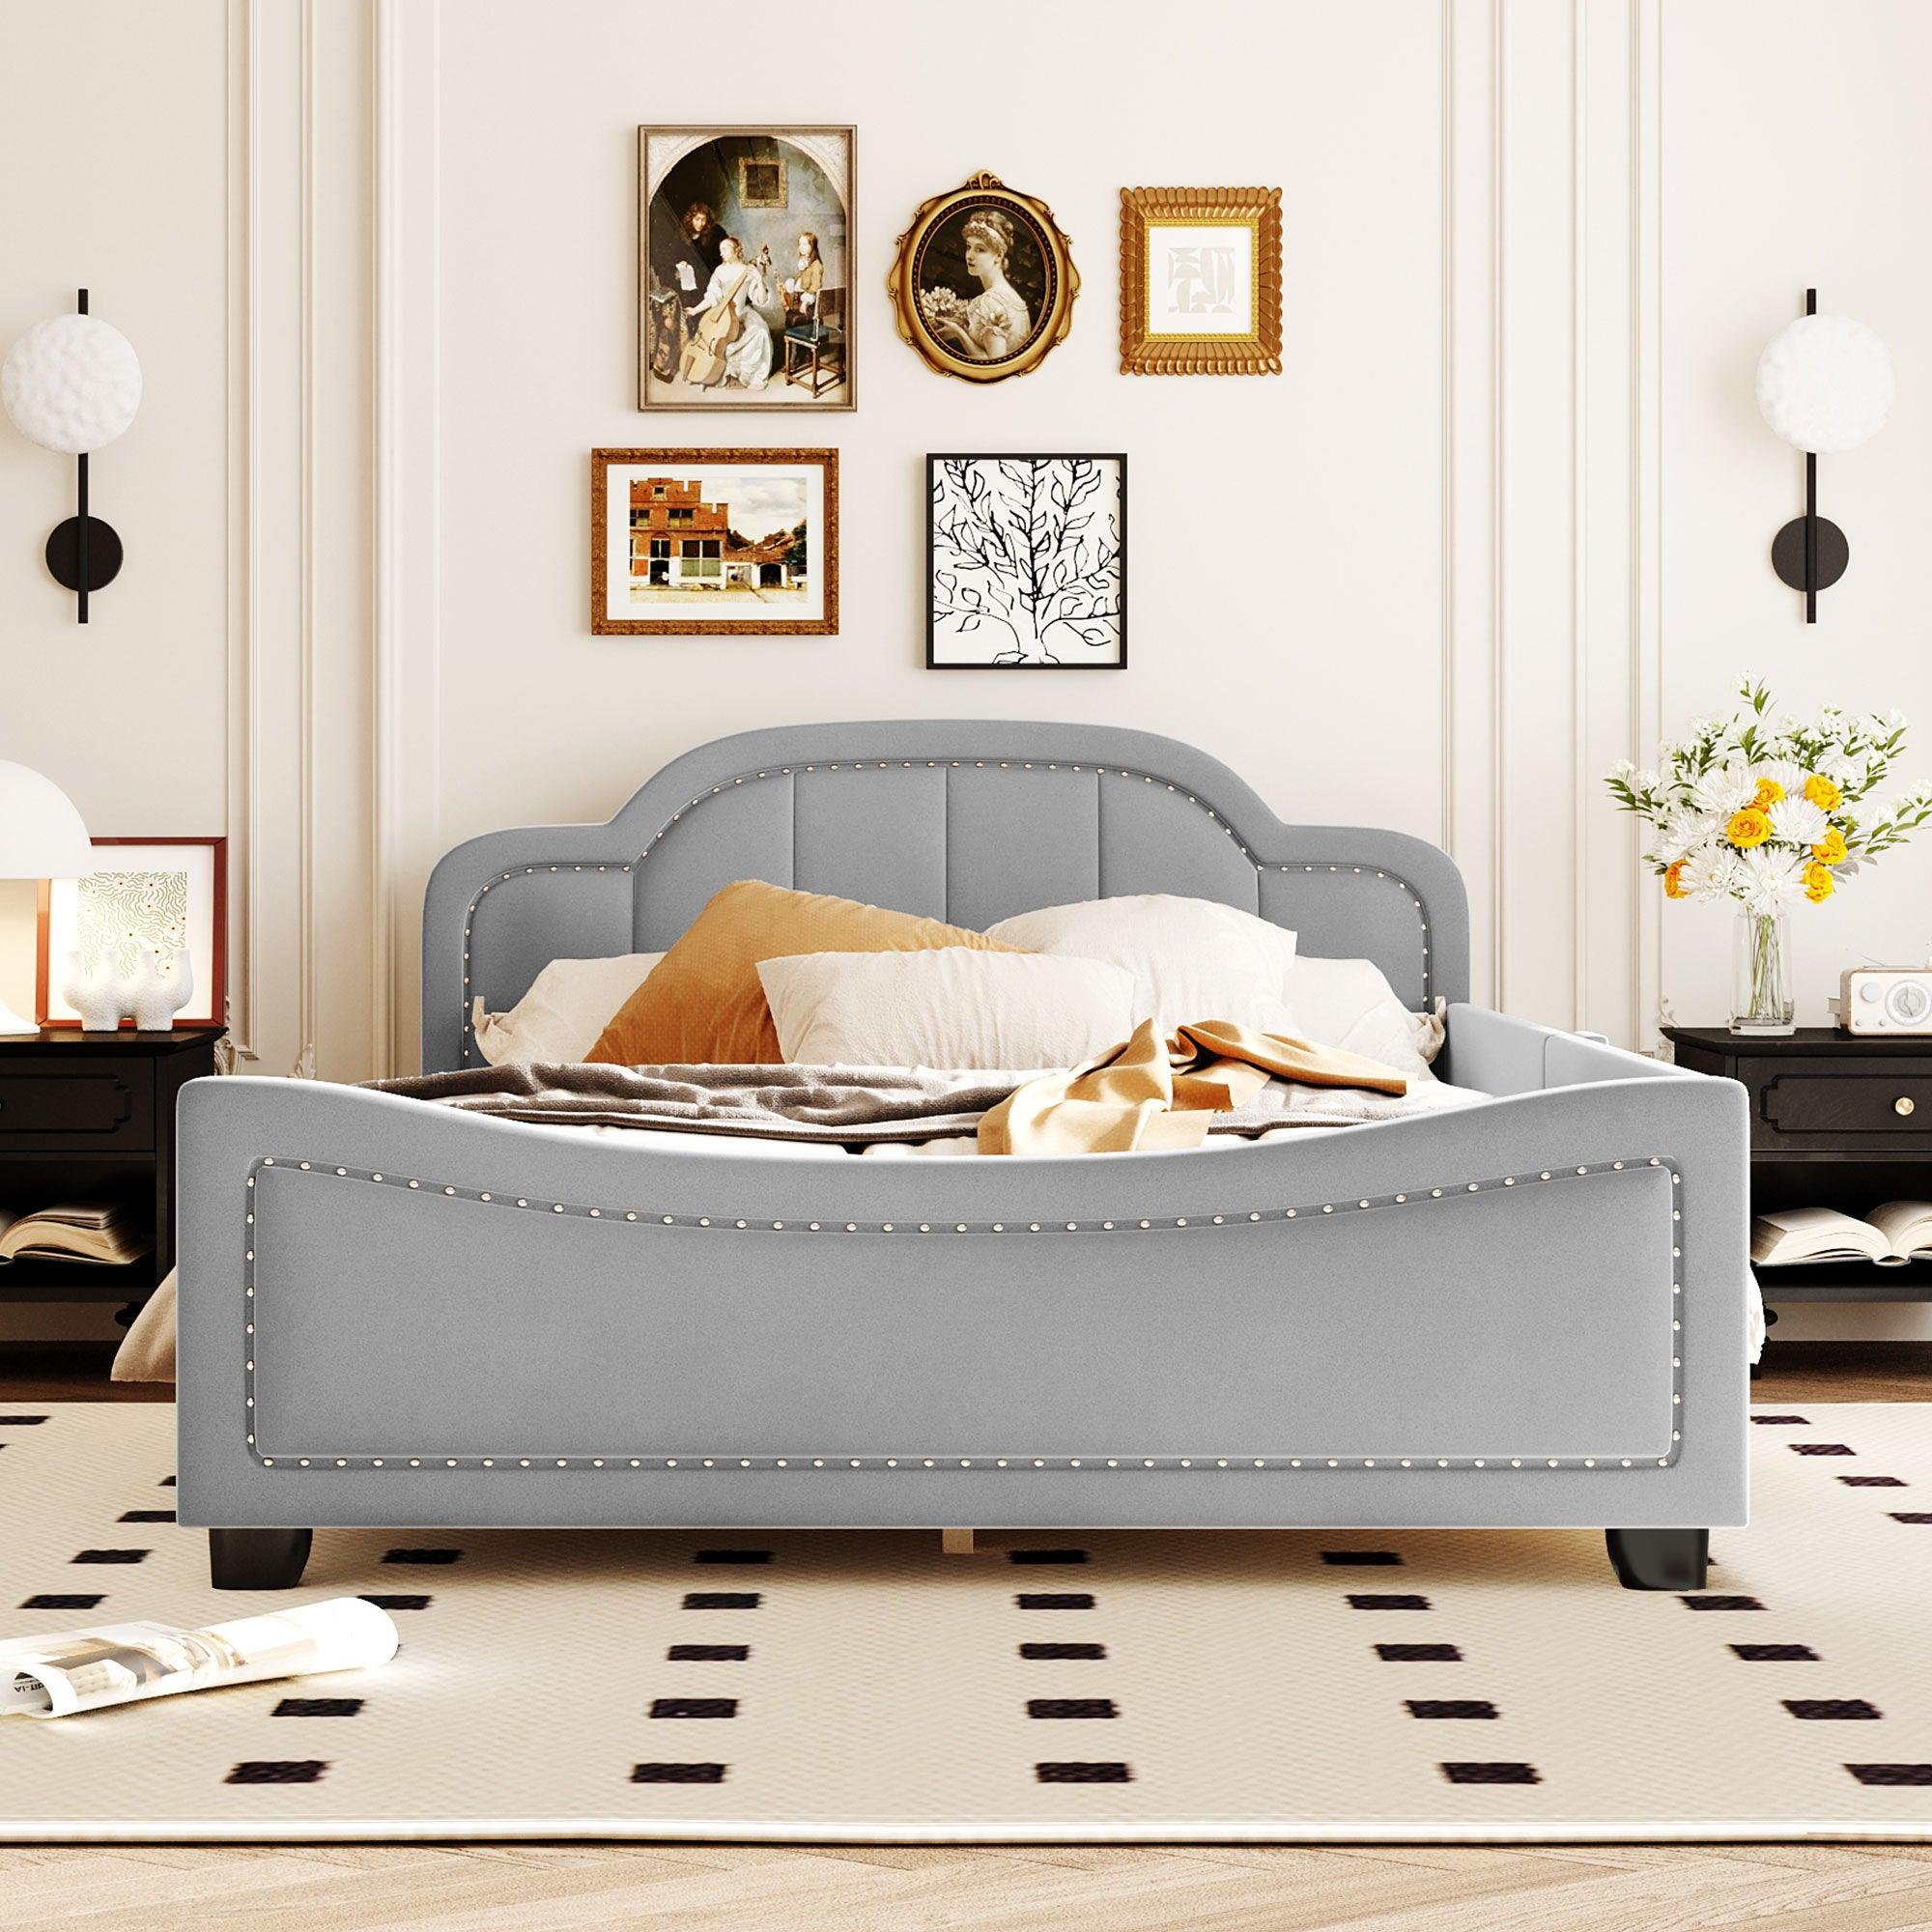 🆓🚛 Full Size Upholstered Daybed With Cloud Shaped Headboard, Embedded Elegant Copper Nail Design, Gray